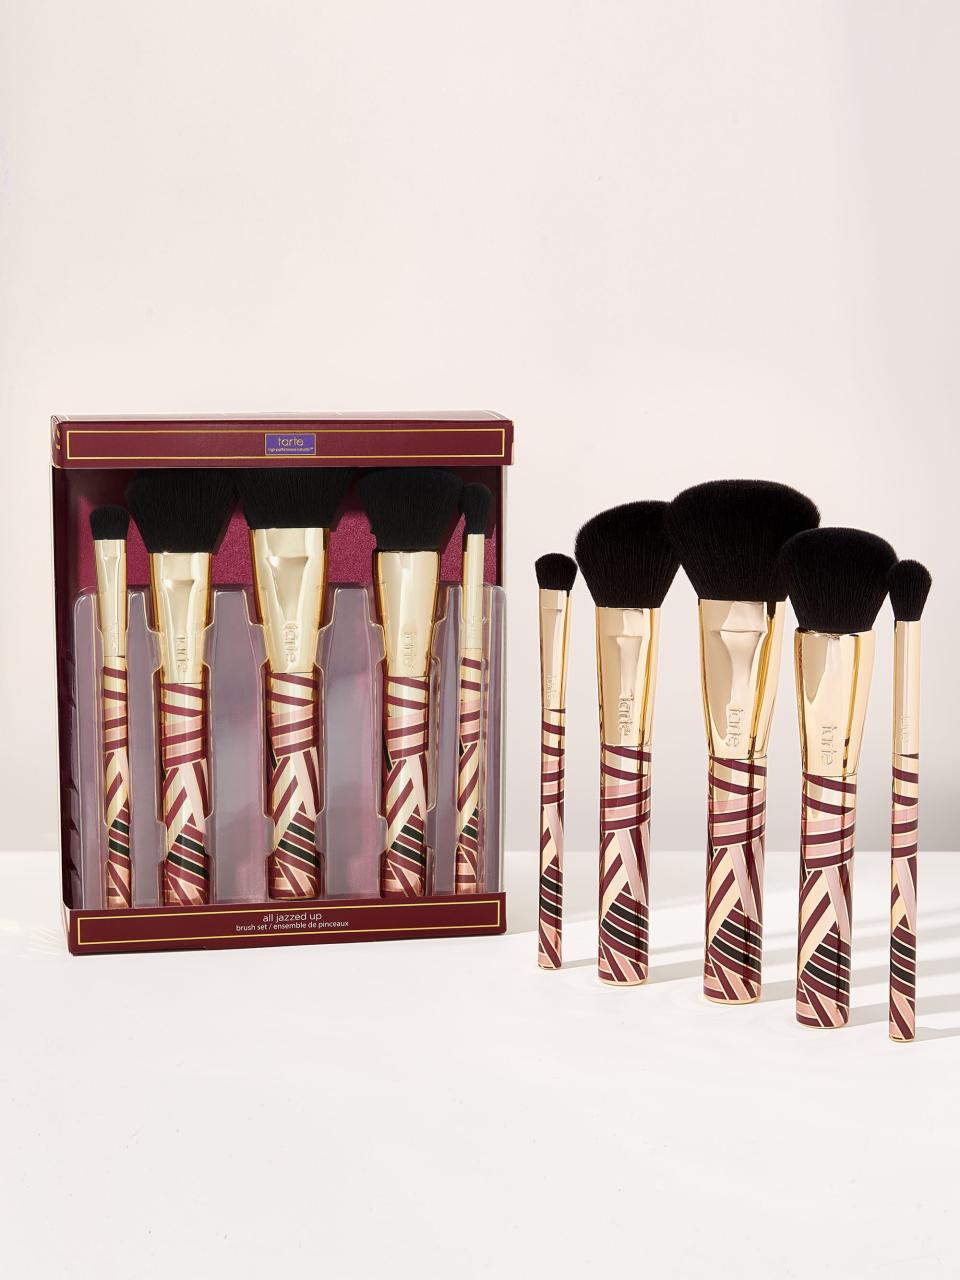 <p><strong>Tarte Cosmetics</strong></p><p>tartecosmetics.com</p><p><strong>$39.00</strong></p><p>Not only does this bundle of brushes work wonders at creating a gorgeous glam, but they have geometrically-designed handles that are eye-catching, too. Treat yourself to the pretty set or surprise a loved one during the holiday season. </p>